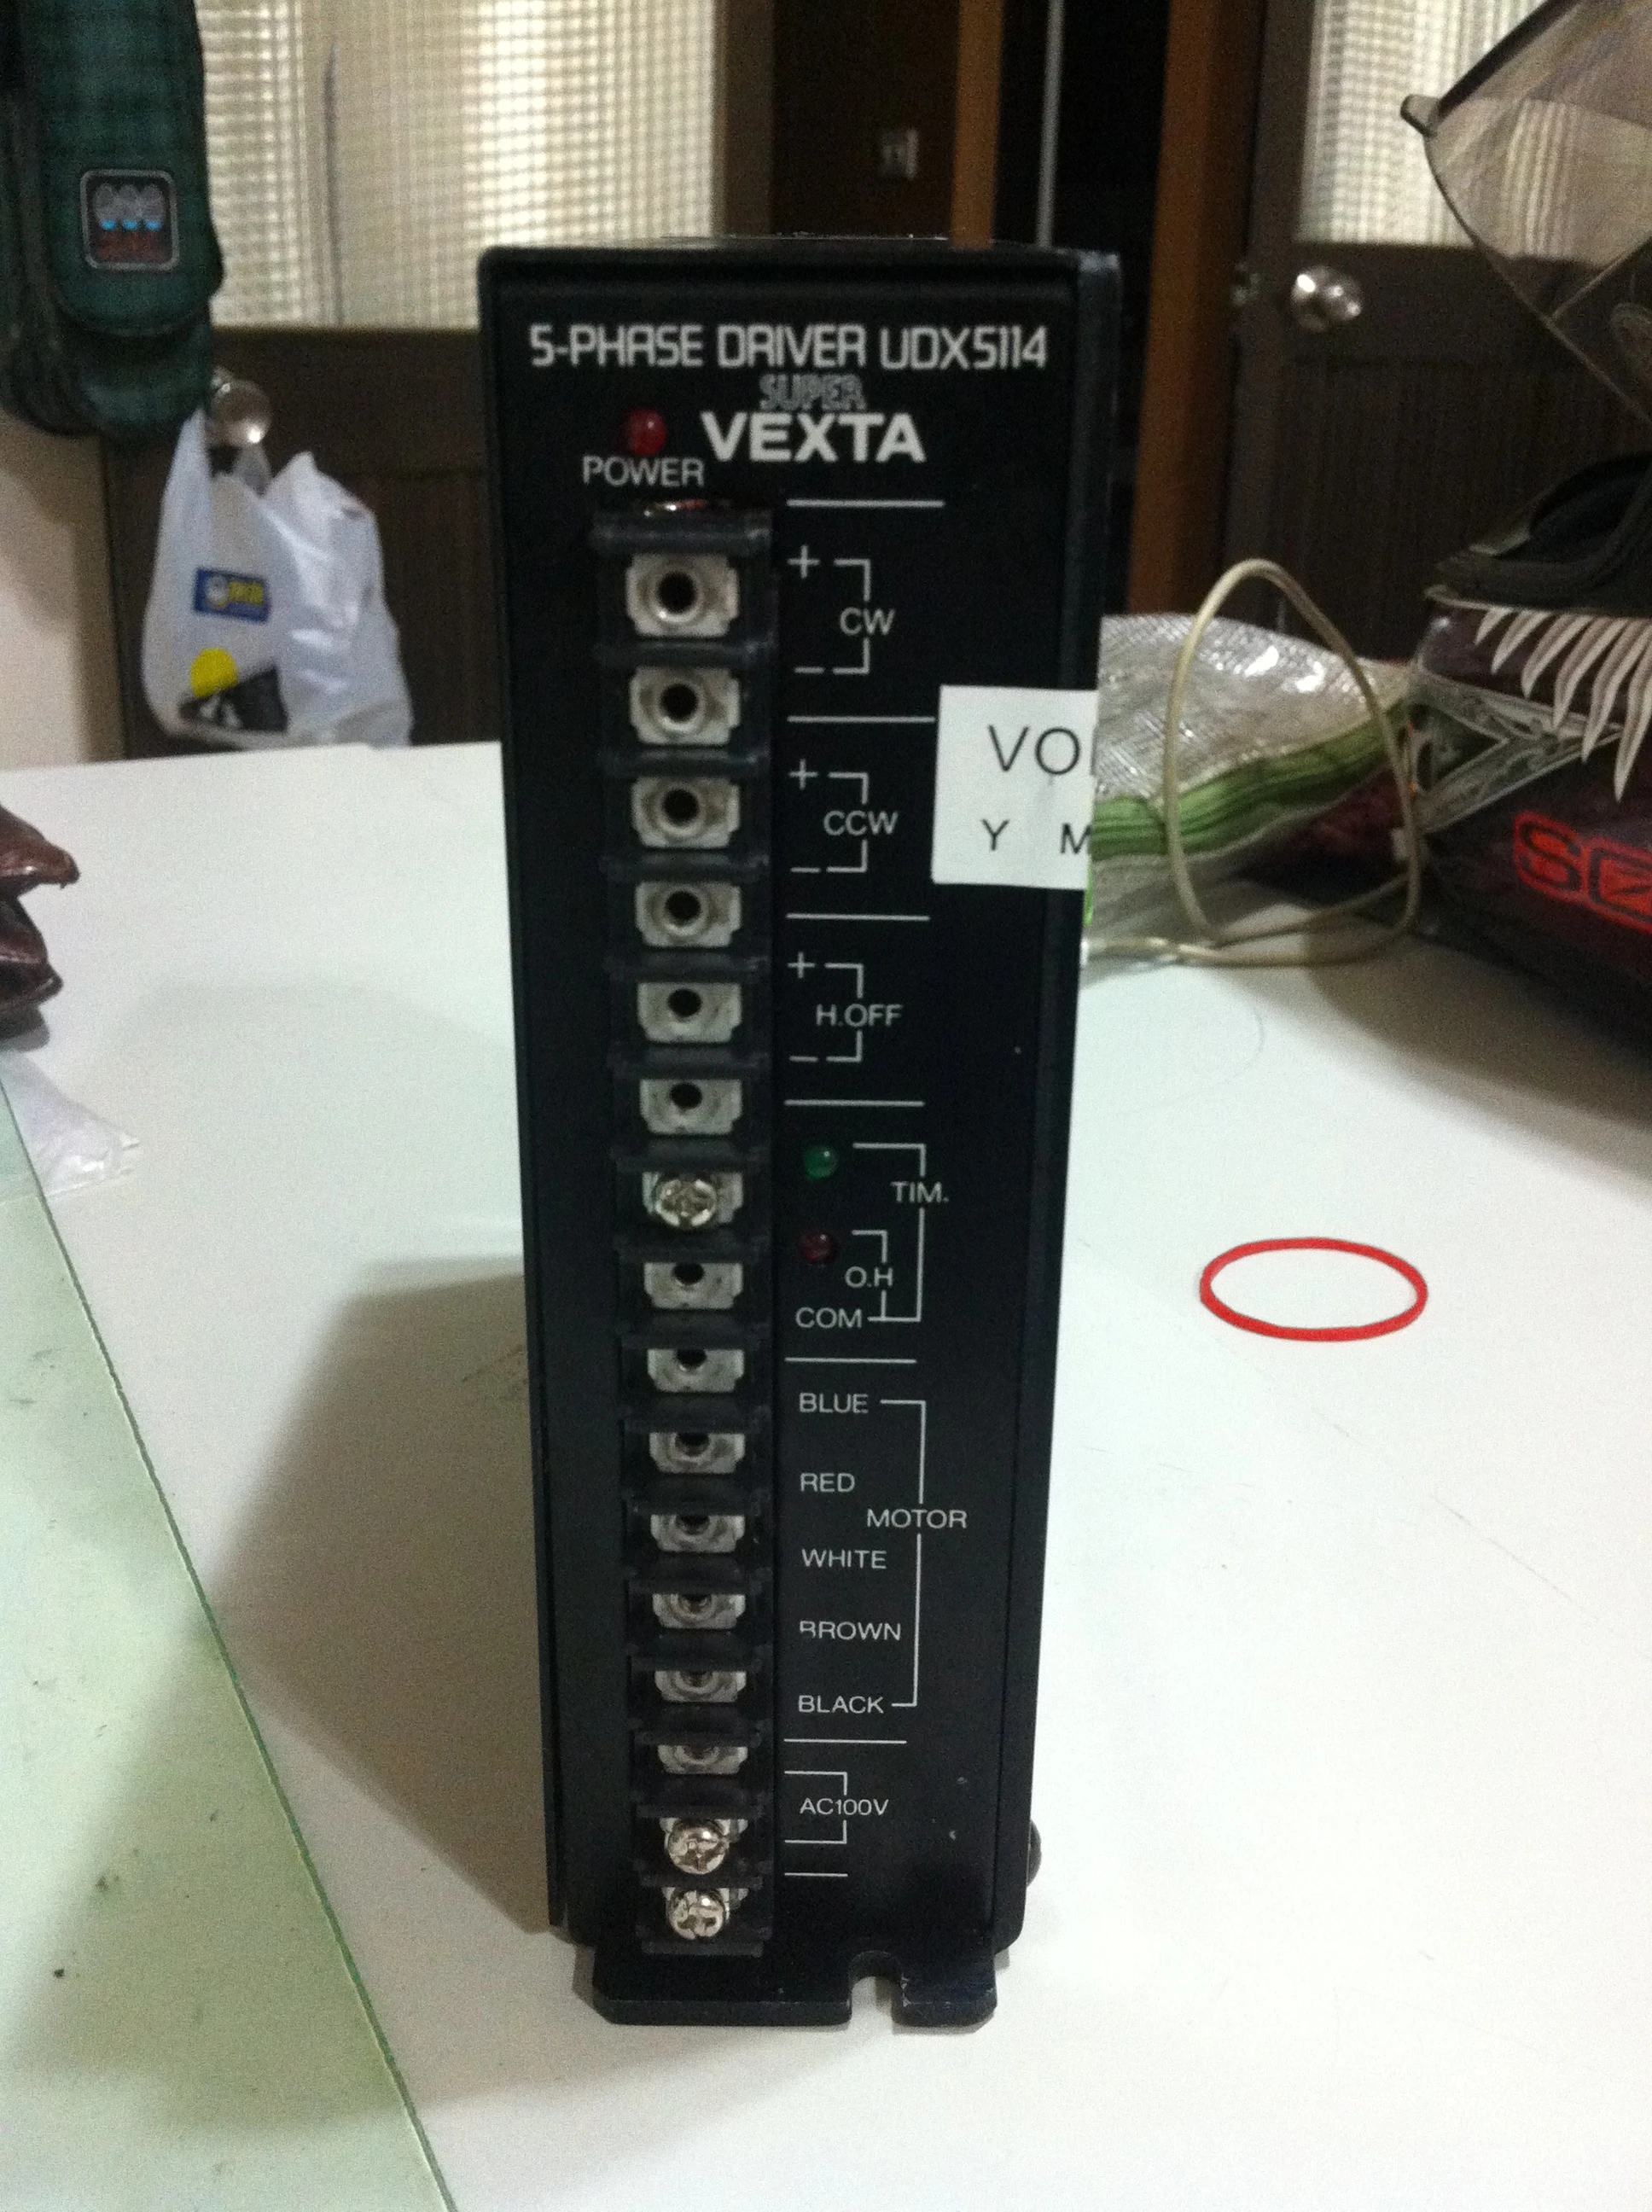 VEXTA 5-PHASE DRIVER